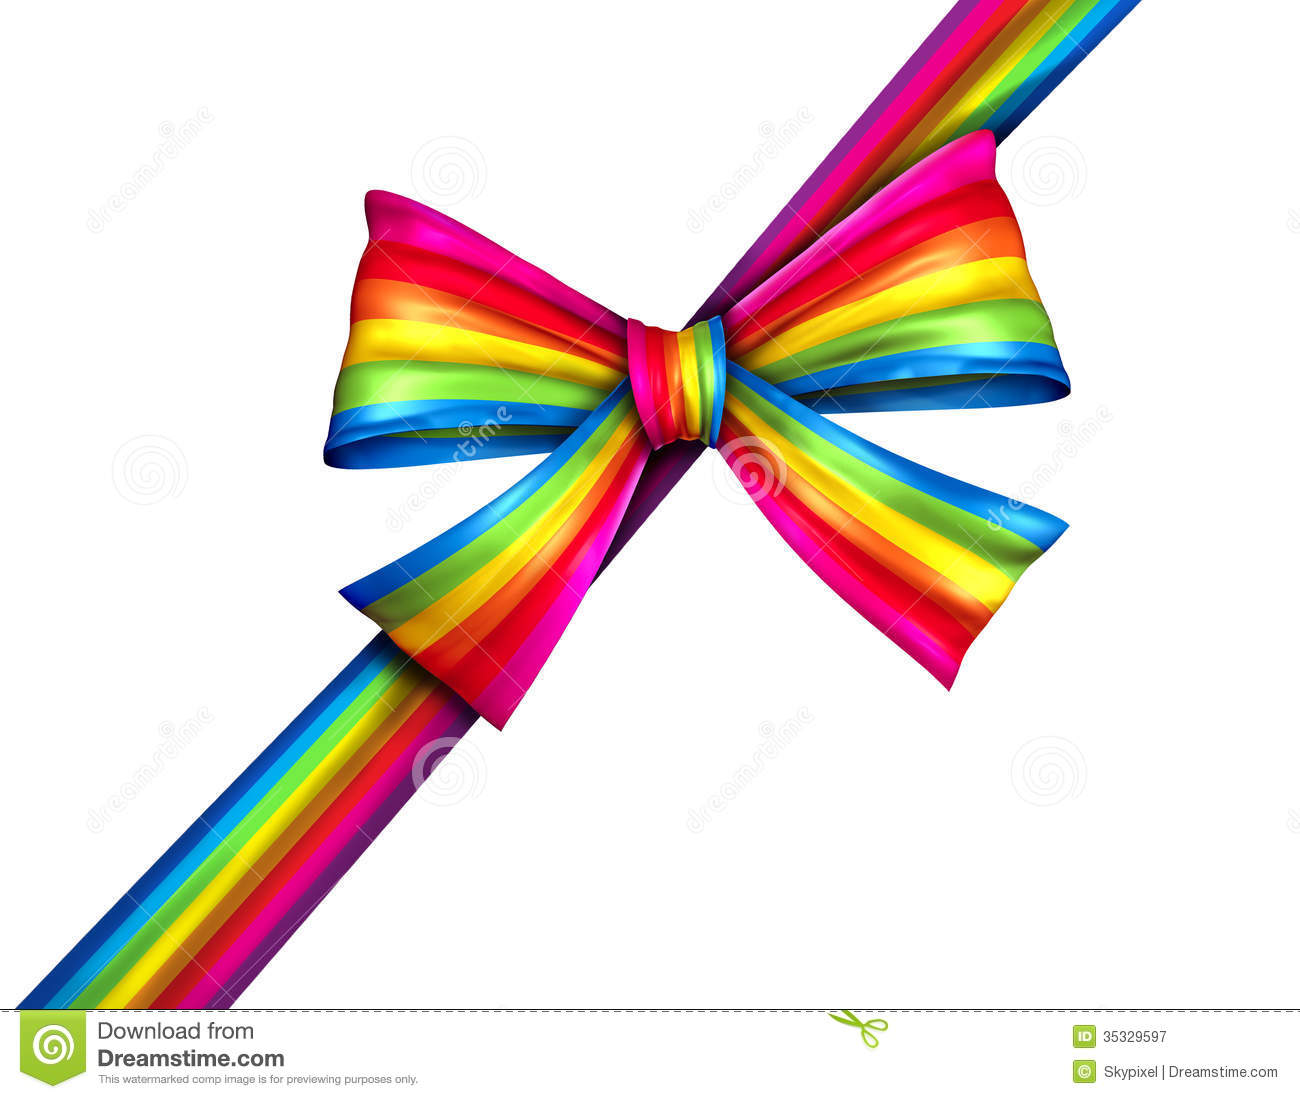 Rainbow Diagonal Gift Ribbon Bow As A Silk Present With Wrapping Tape